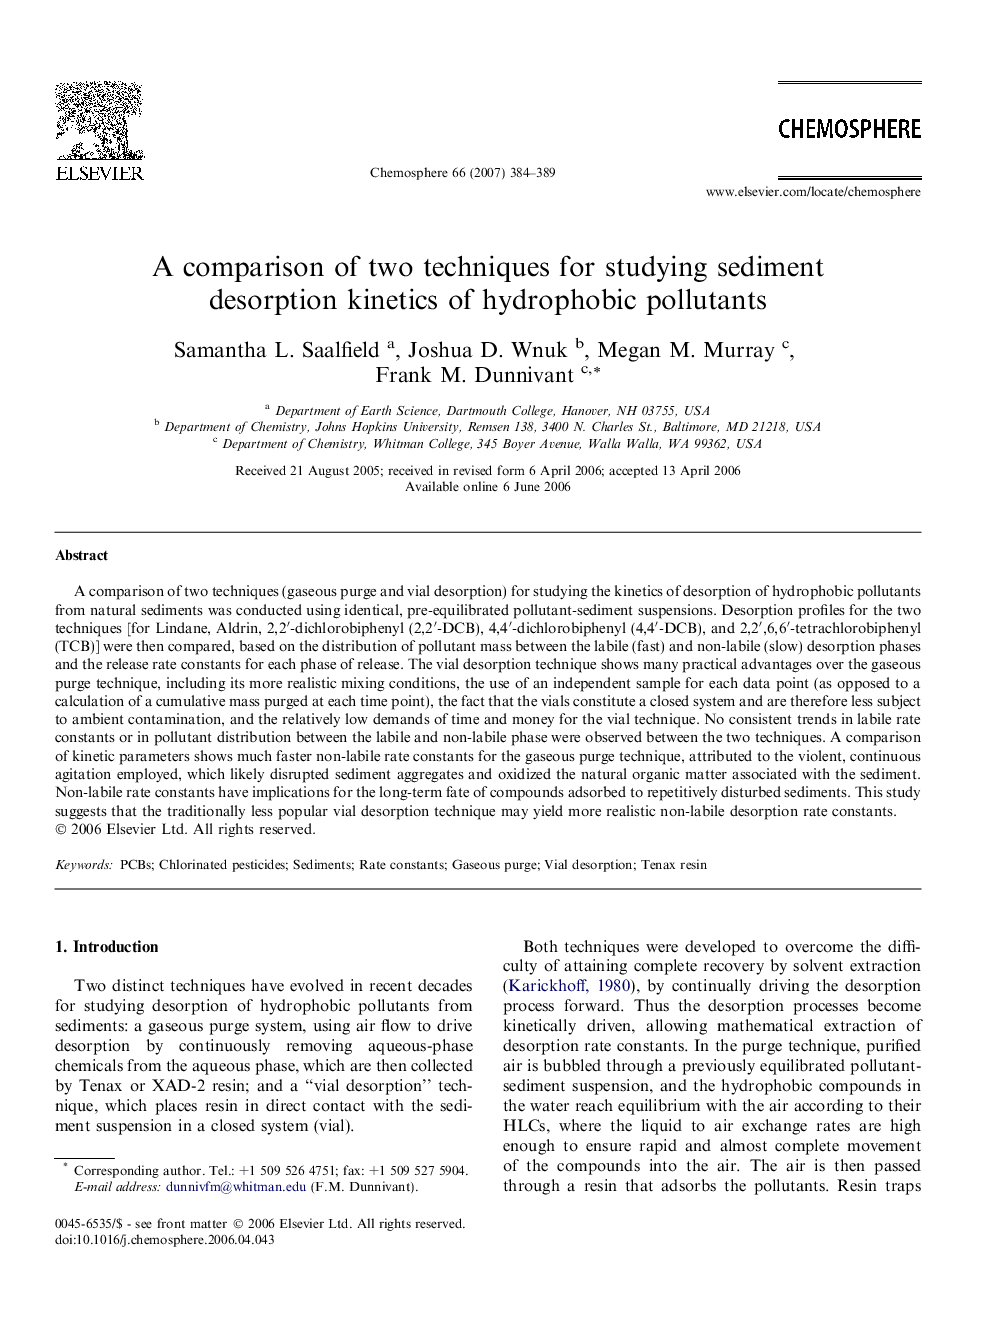 A comparison of two techniques for studying sediment desorption kinetics of hydrophobic pollutants